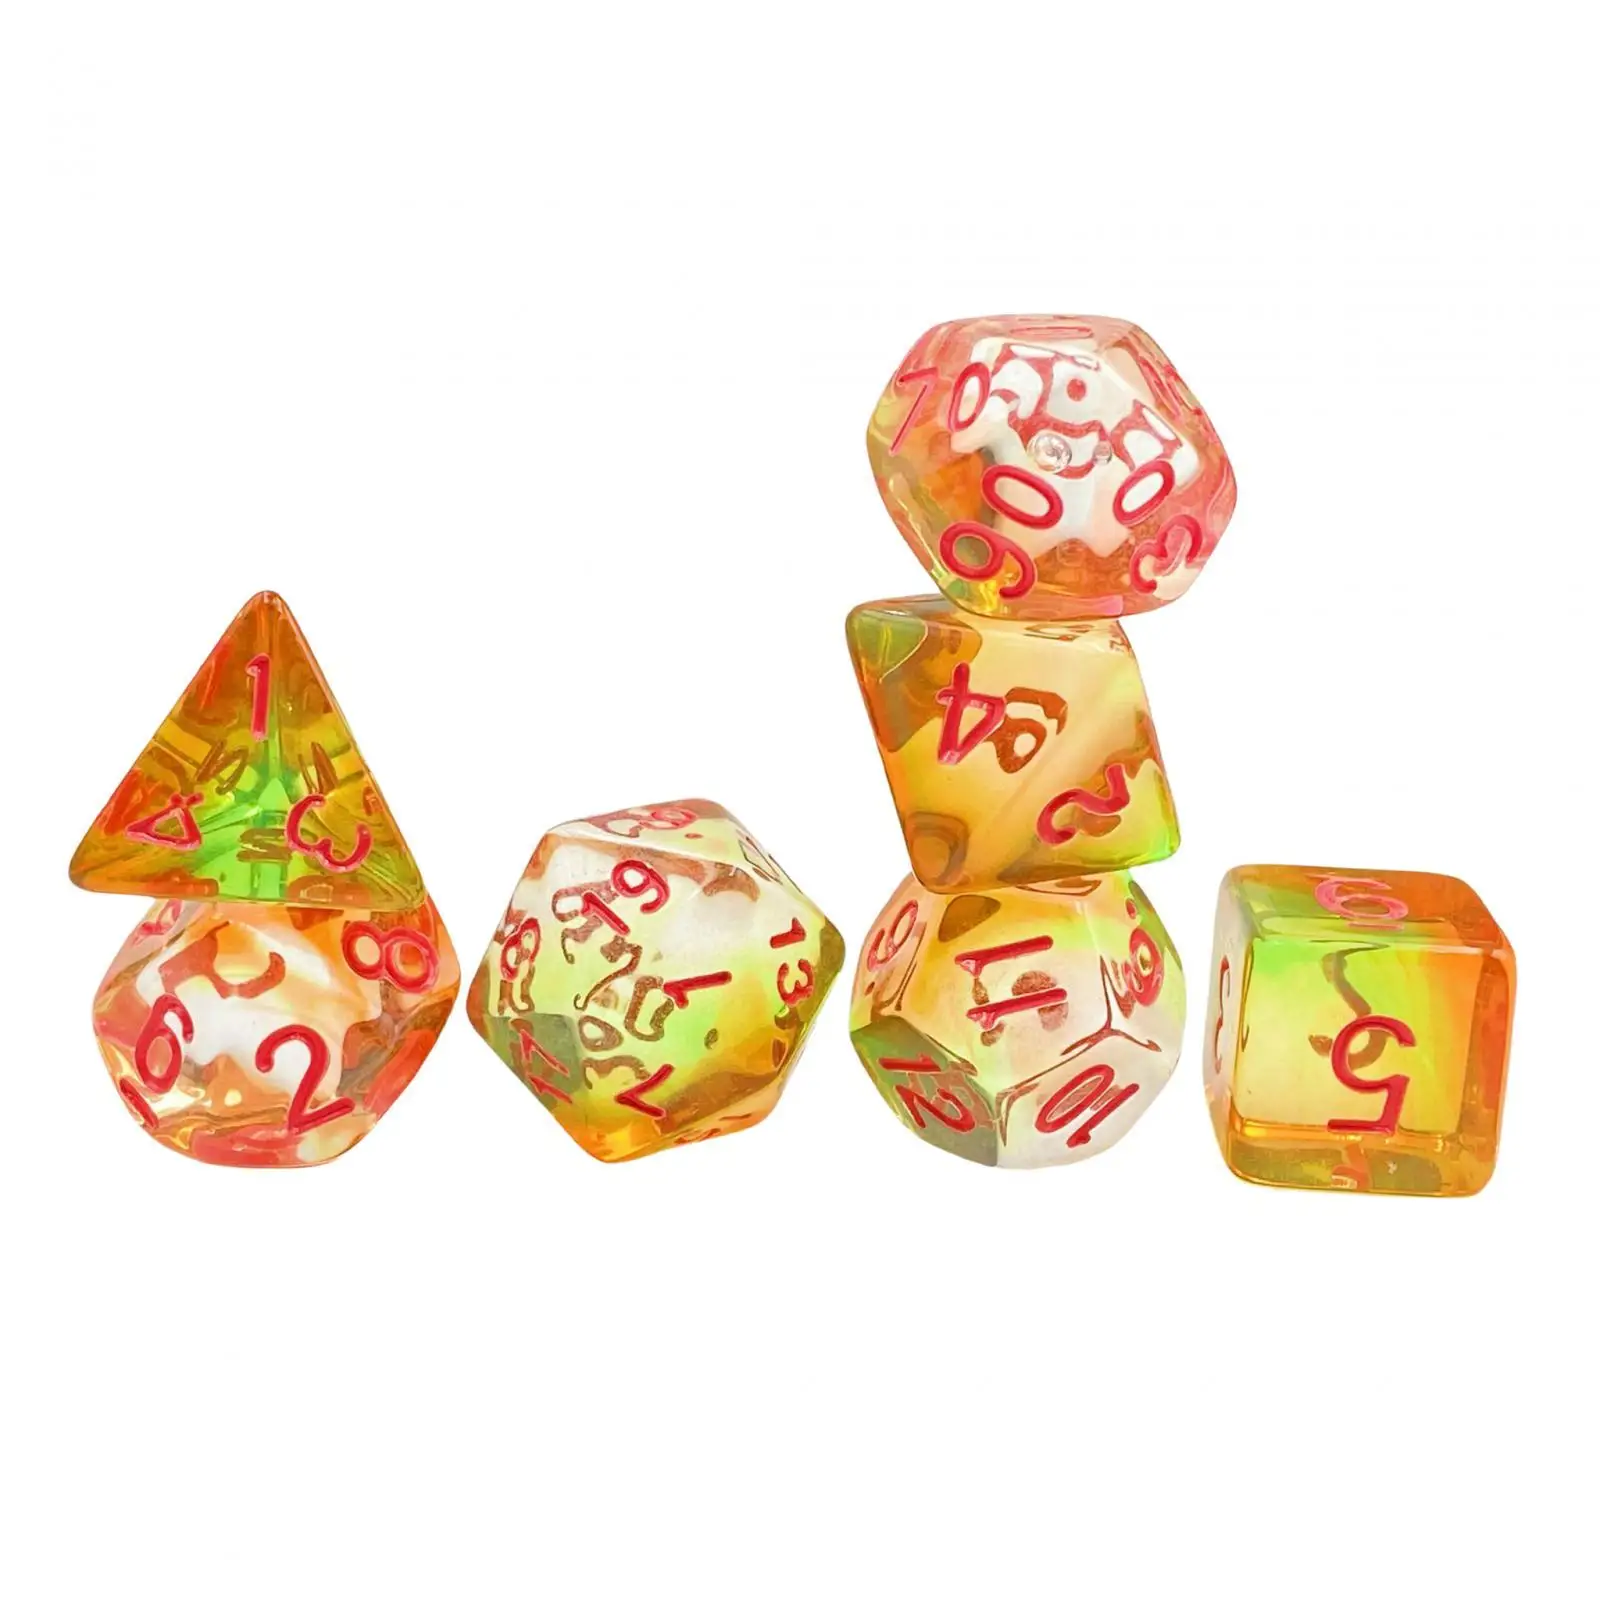 7x Polyhedral Dices Party Supplies Role Playing Game Dices D4-d20 Multi Sided Dices for Card Game Role Playing Games Party Game